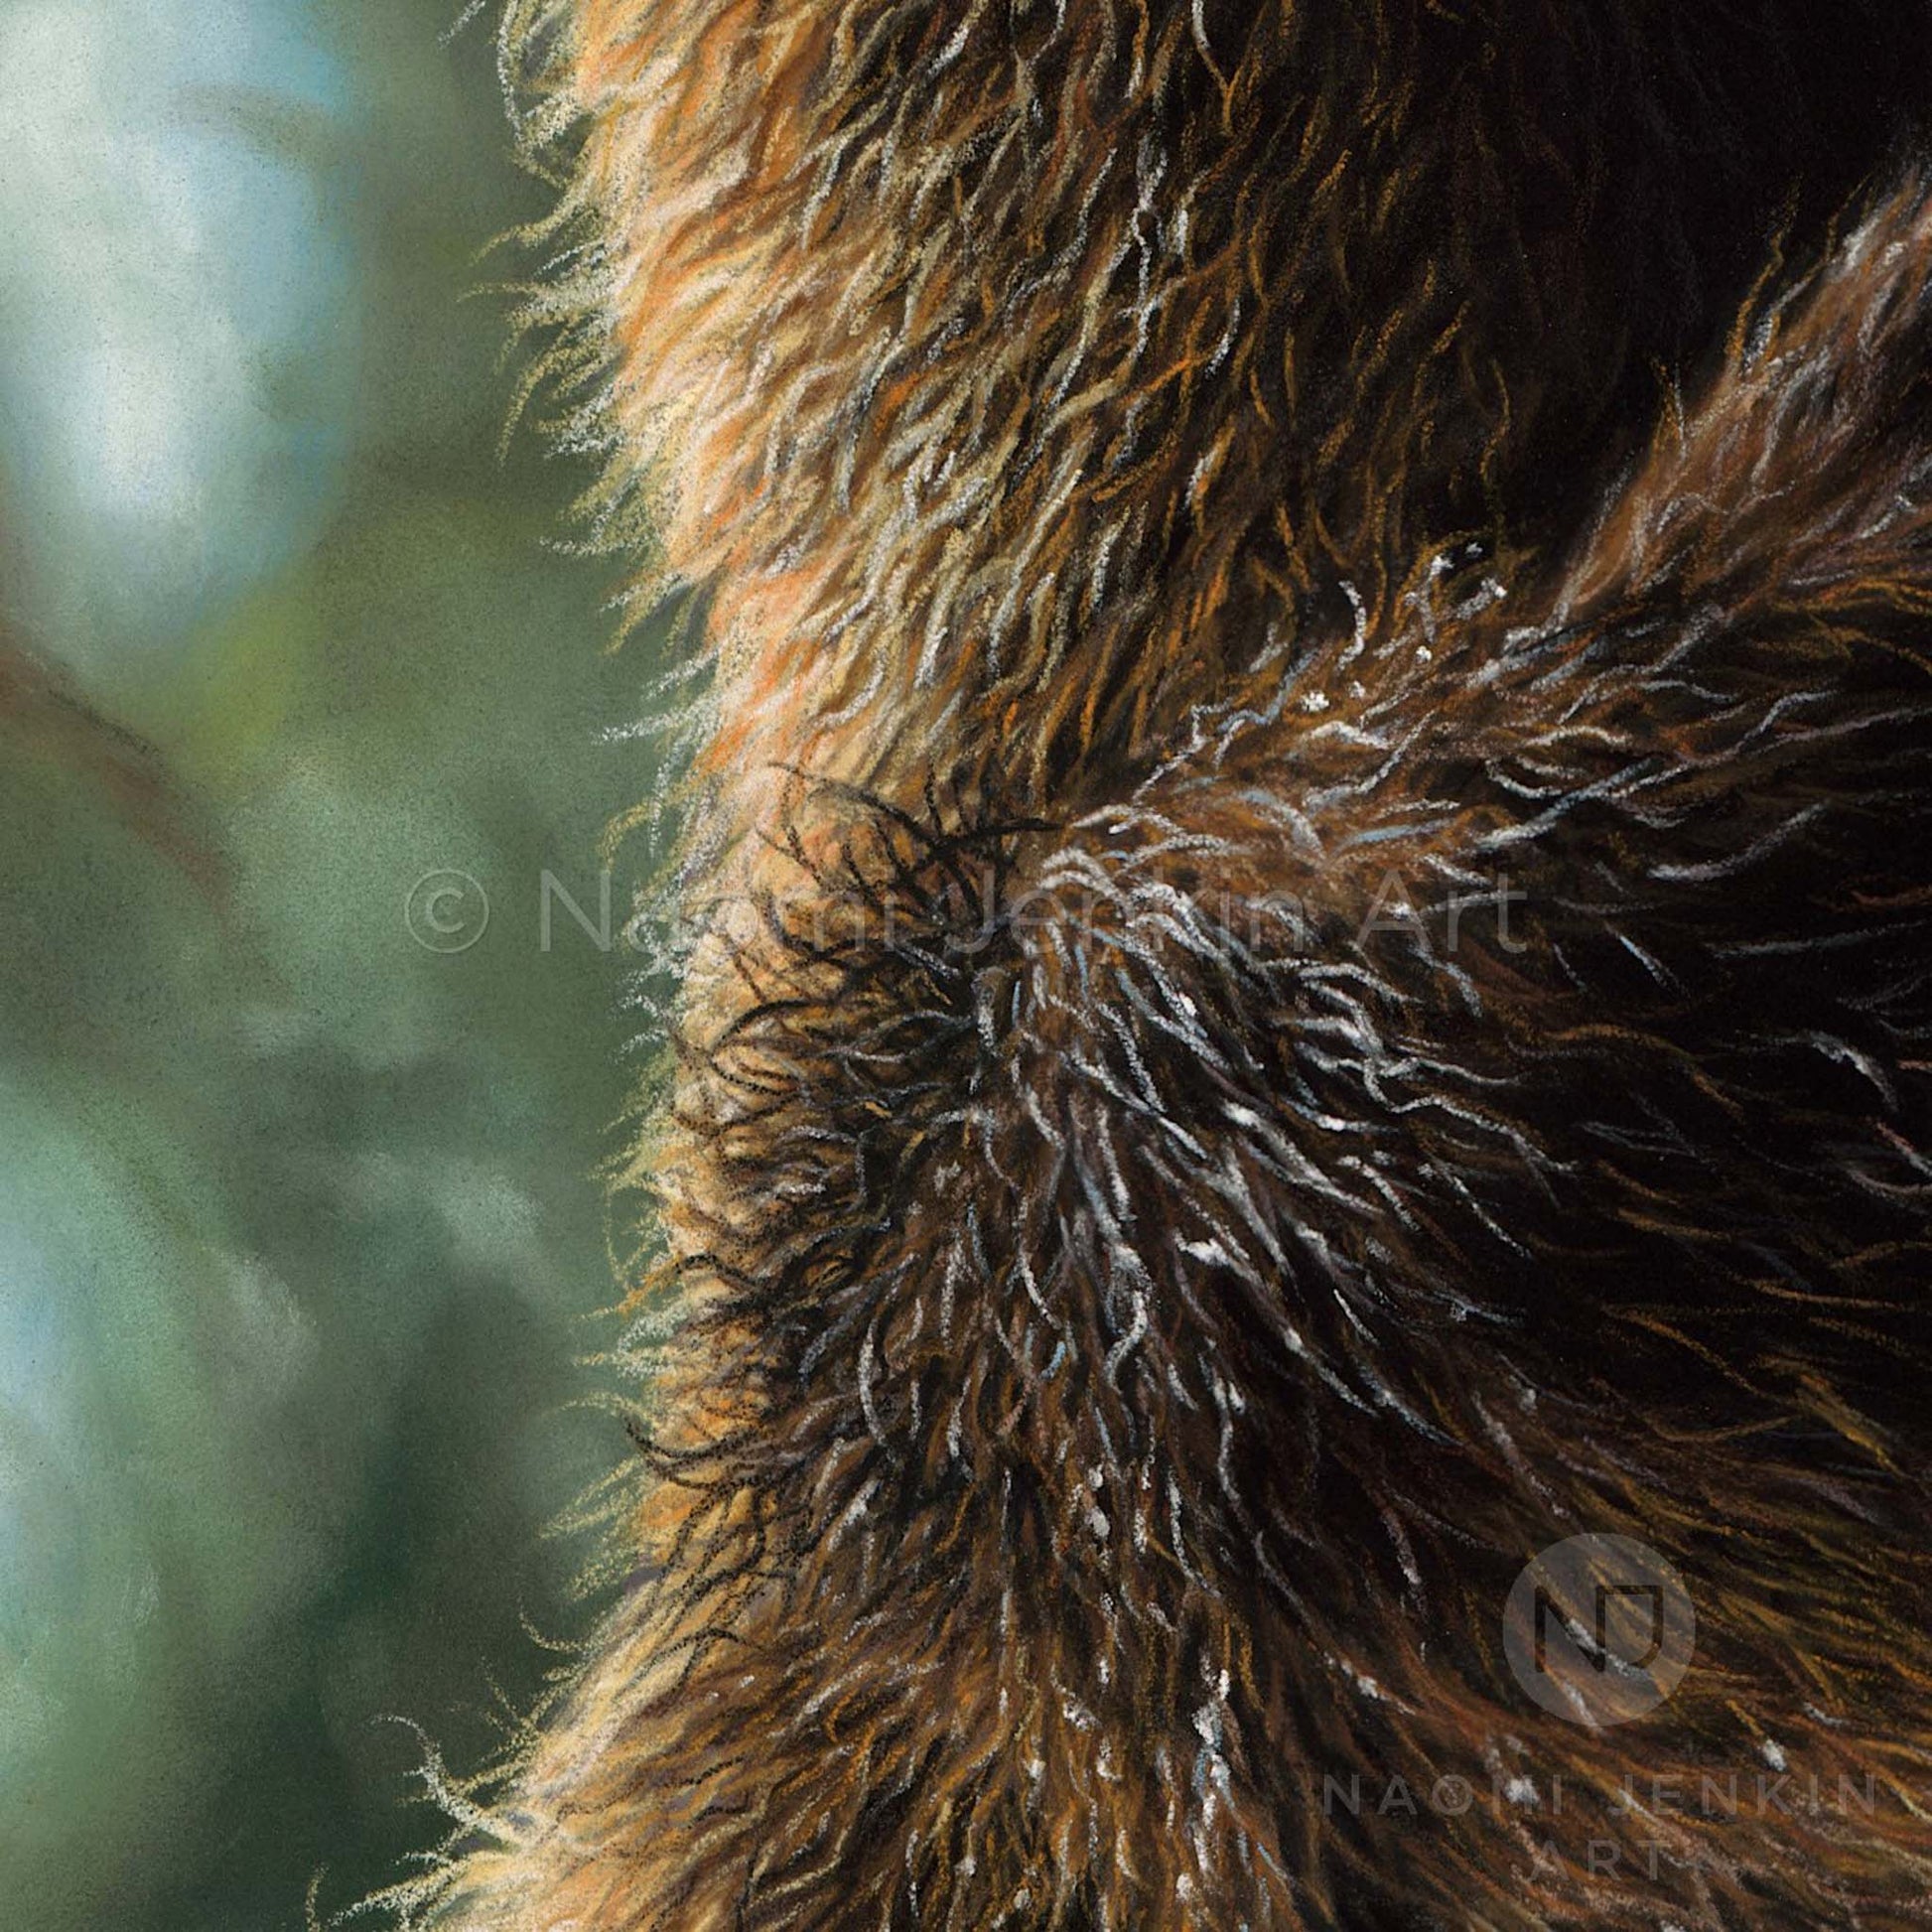 Close up showing the drawing detail in the 'Peekaboo' grizzly bear artwork by Naomi Jenkin